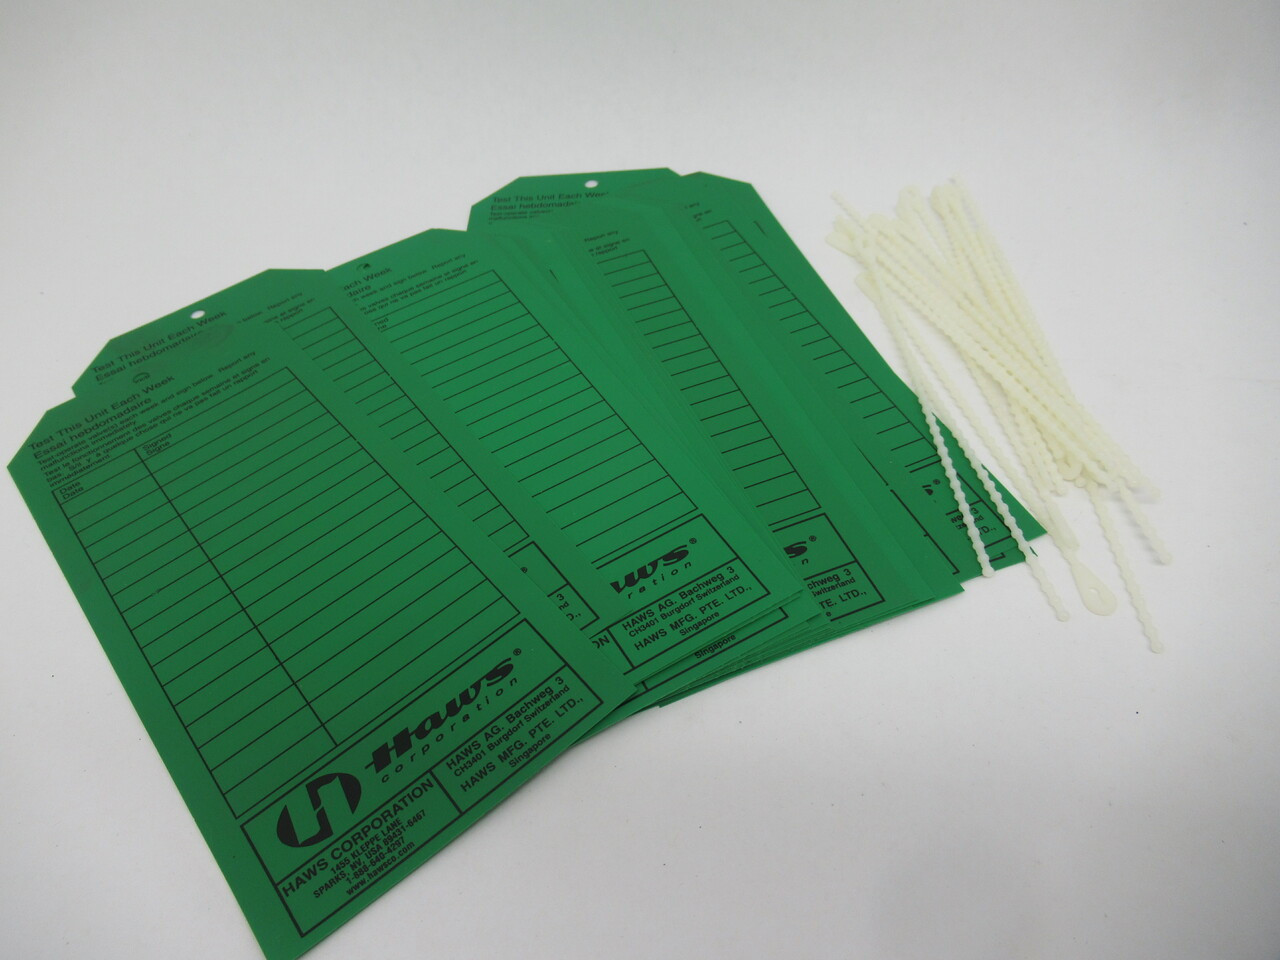 Haws SP170 Green Tags w/Zip Tie "Test This Unit Each Week" Lot of 19 NWB